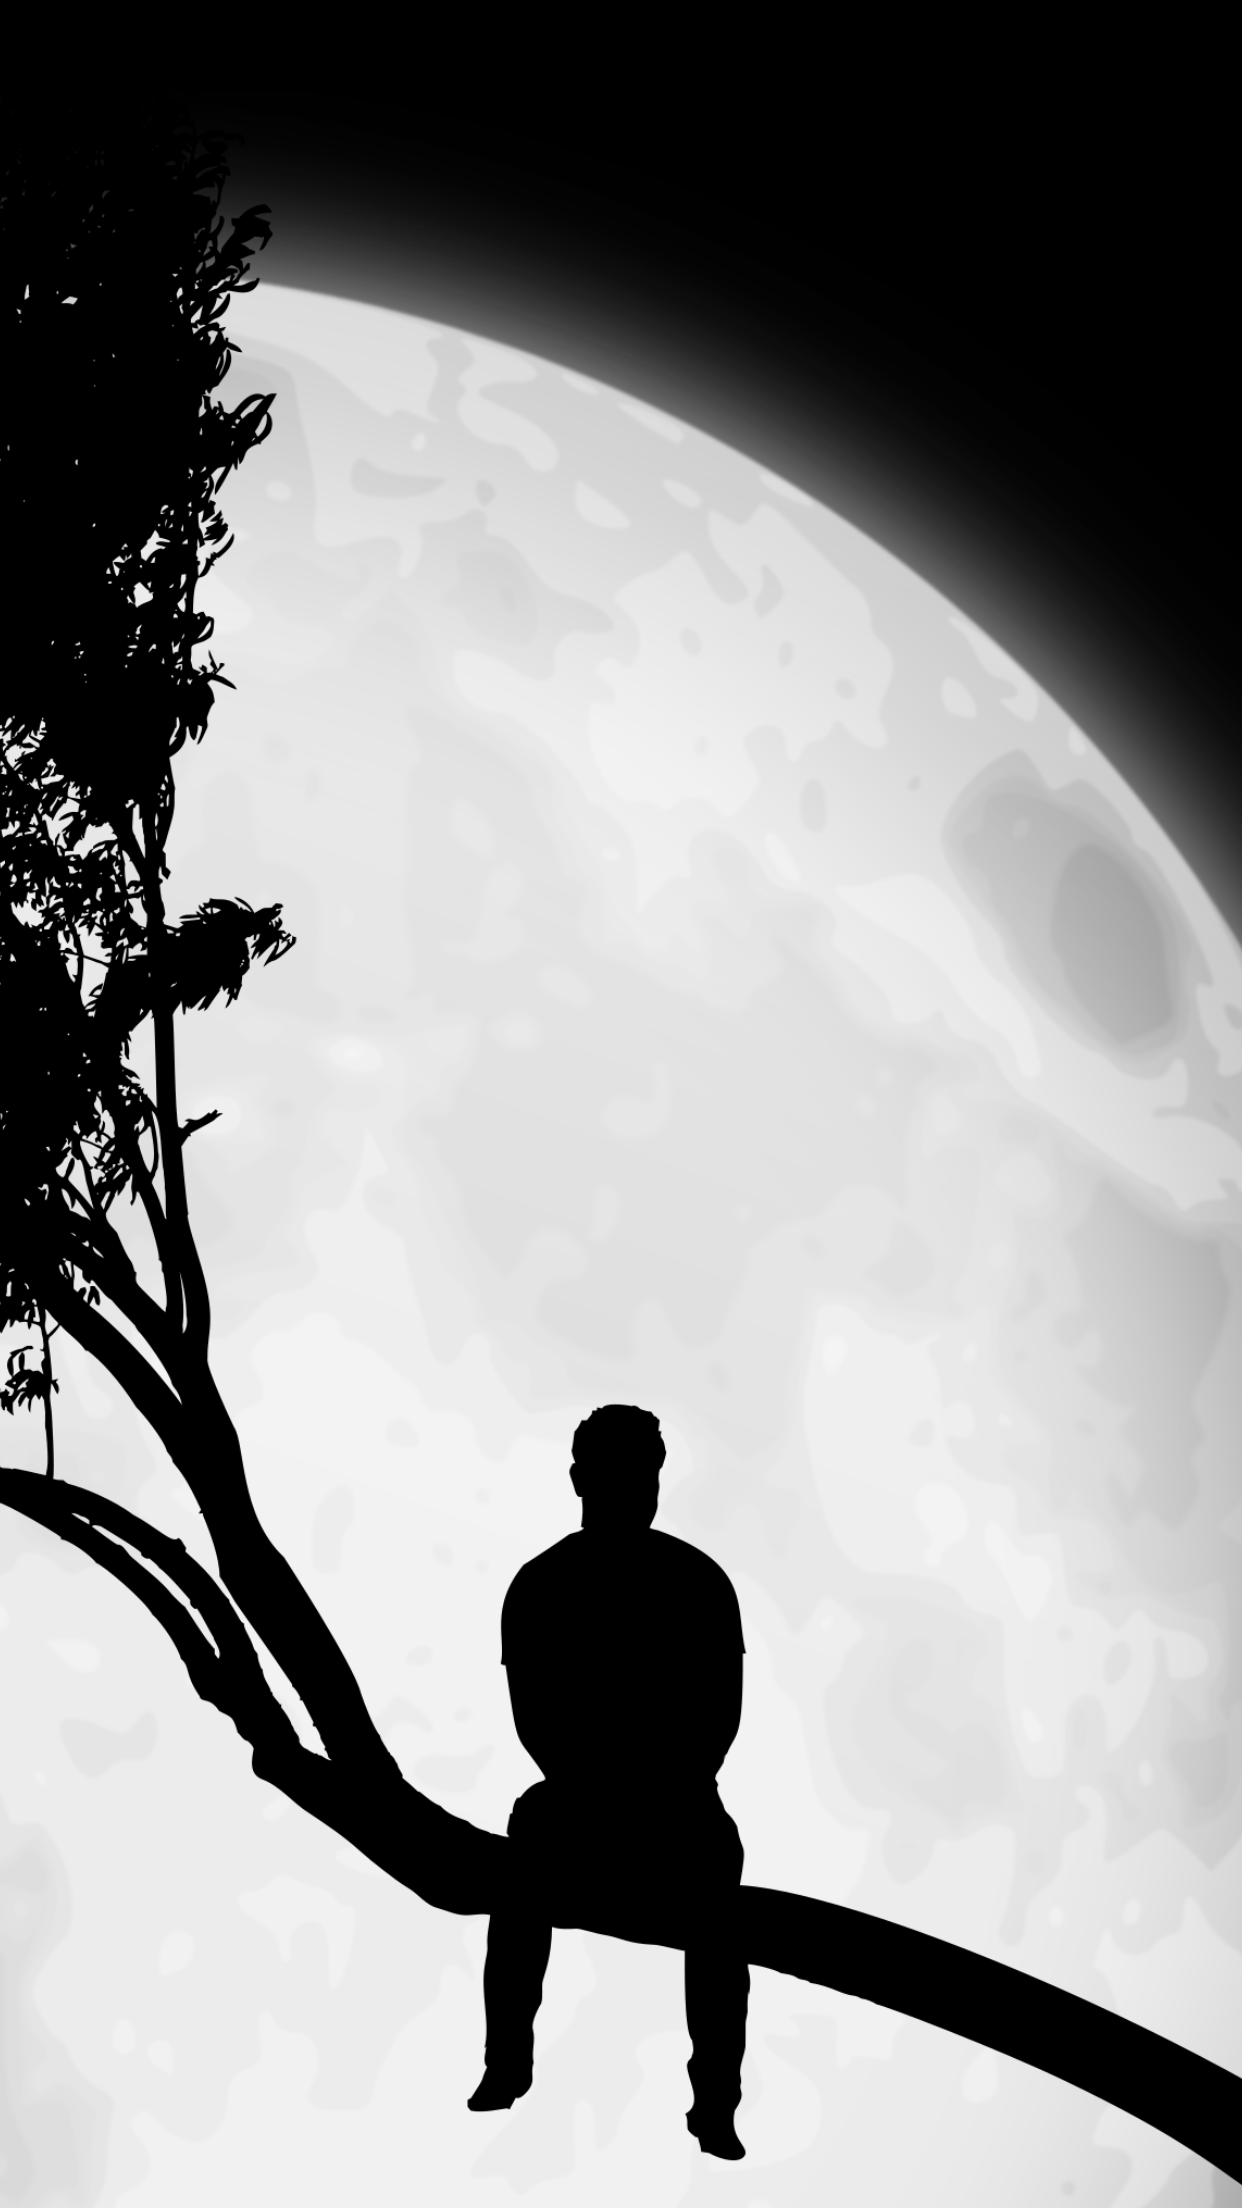 lonely sad boy wallpaper,sky,black and white,monochrome photography,atmosphere,silhouette